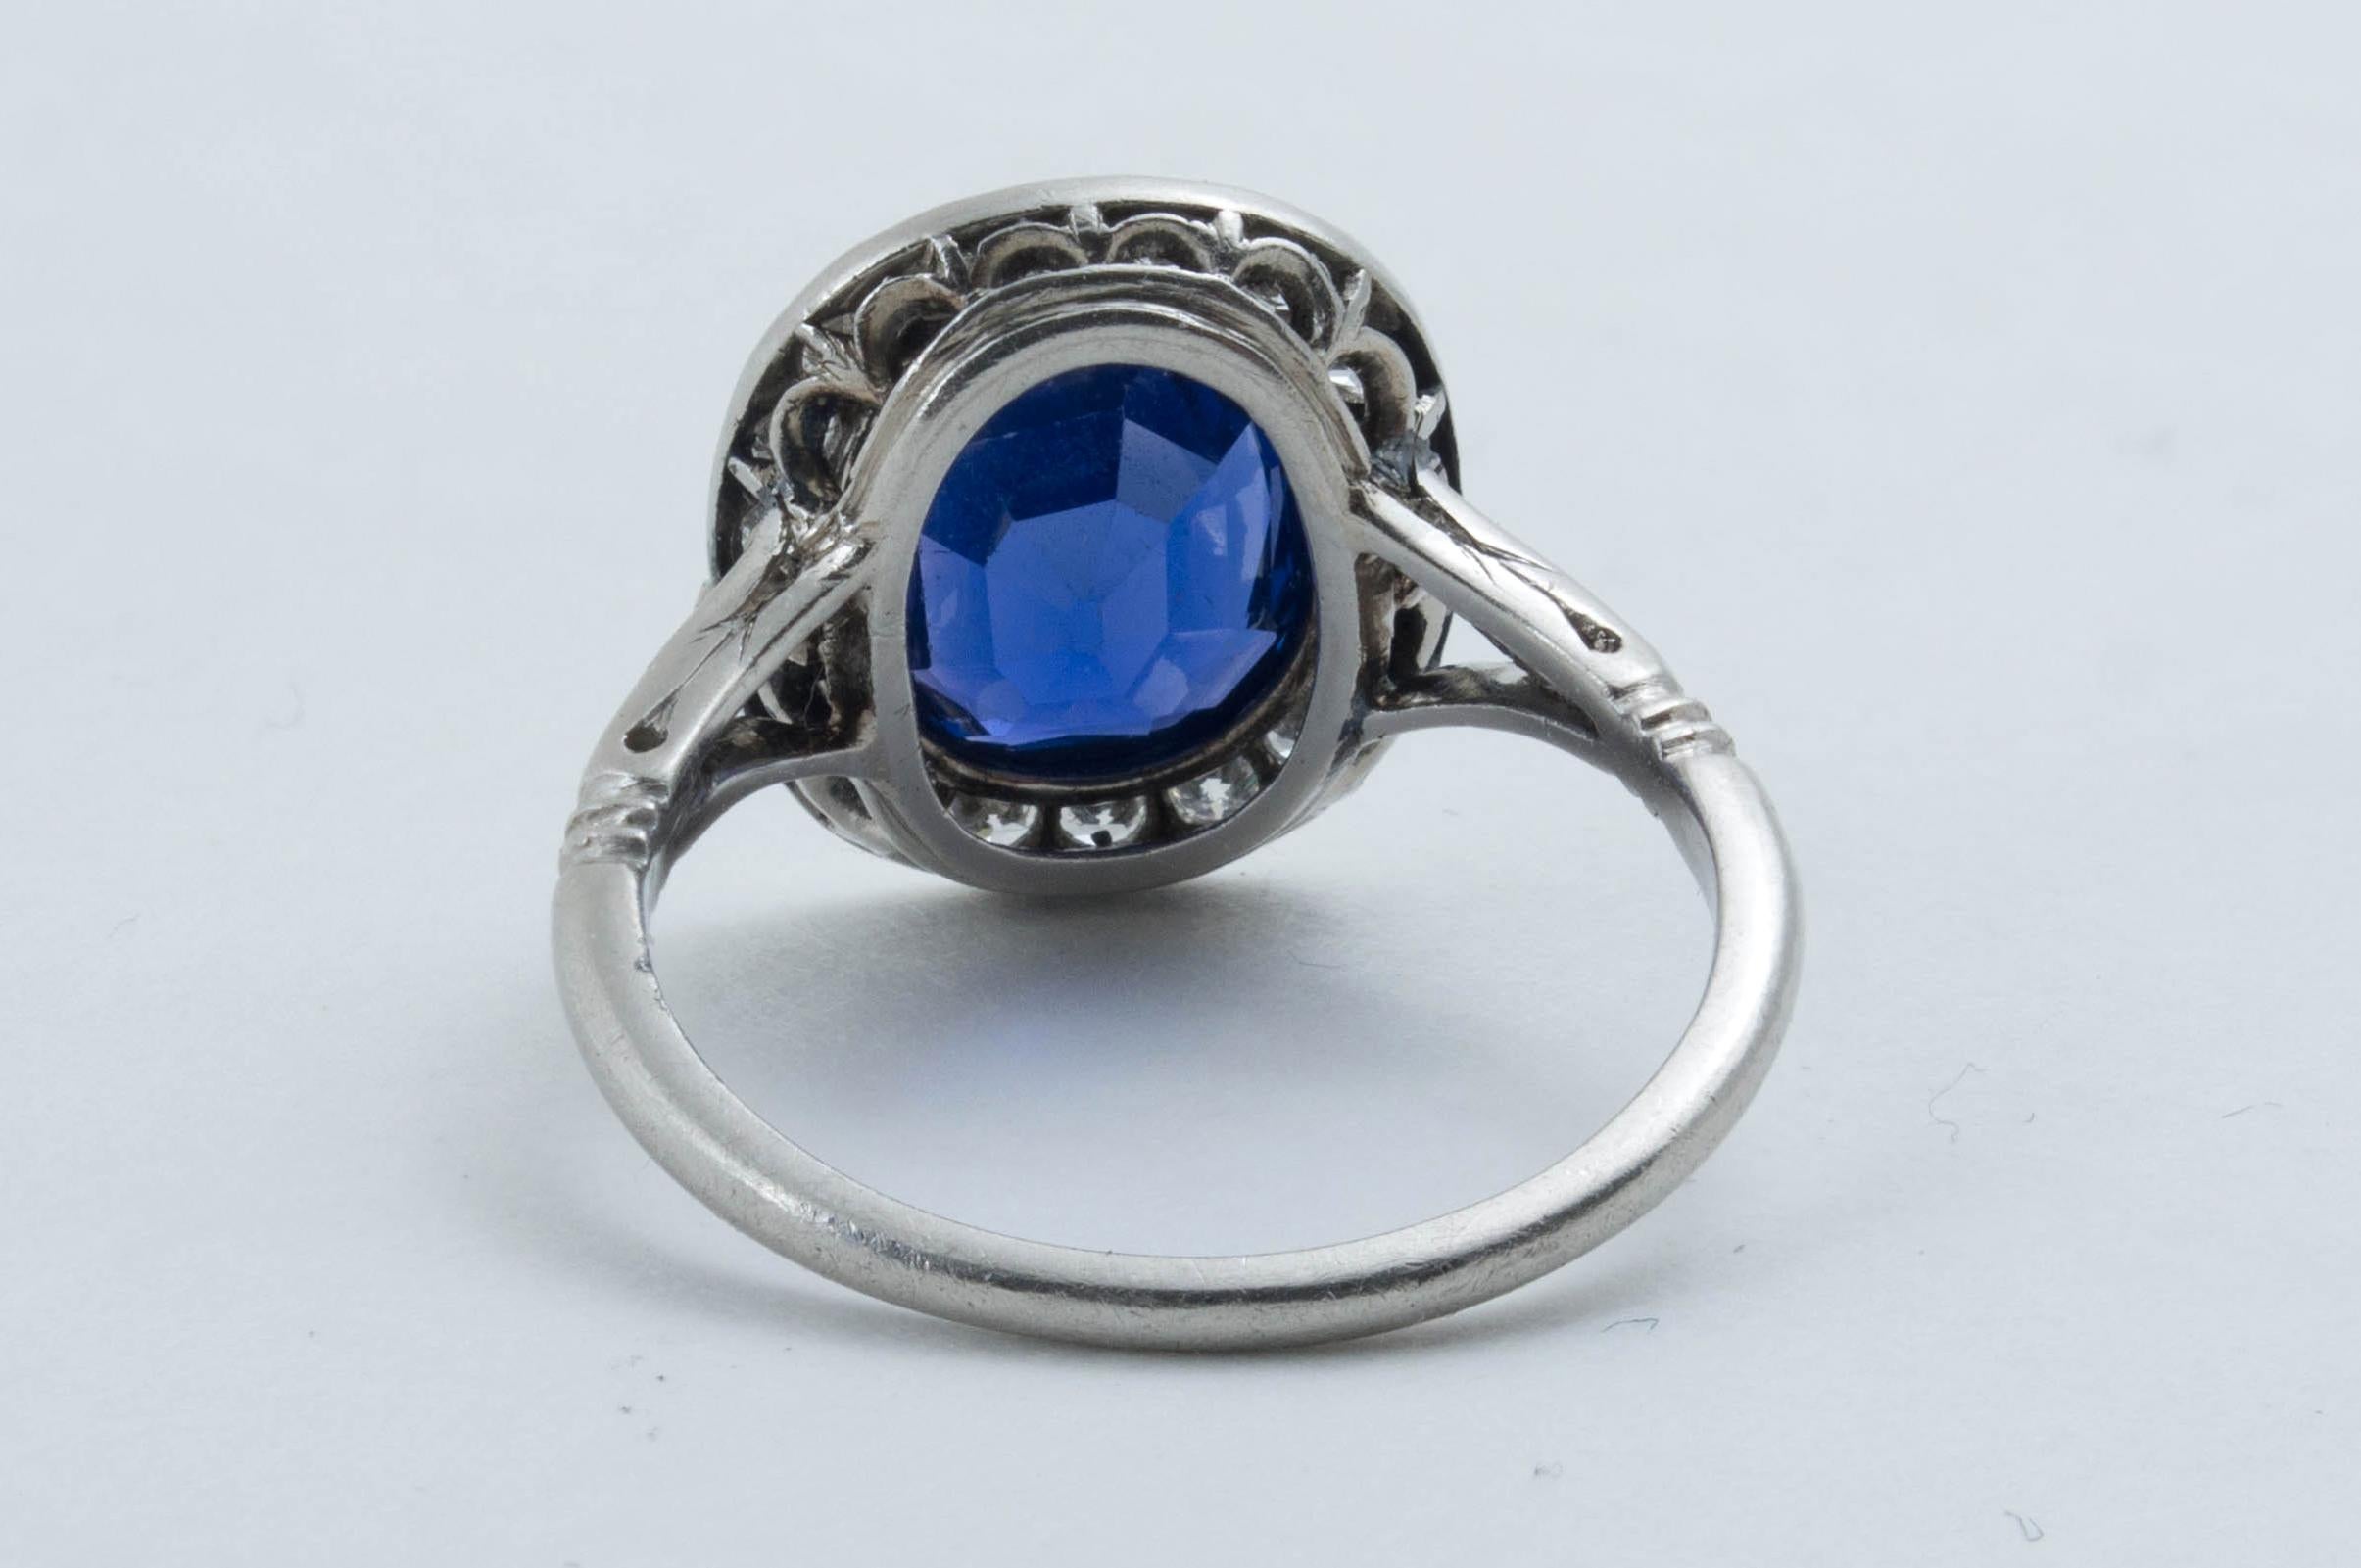 A lovely antique Edwardian sapphire and diamond engagement ring featuring a stunning natural unheated Burmese cushion cut sapphire, all set in platinum, circa 1910. 

The striking ring features a cushion shaped 3.40ct natural unheated Burmese